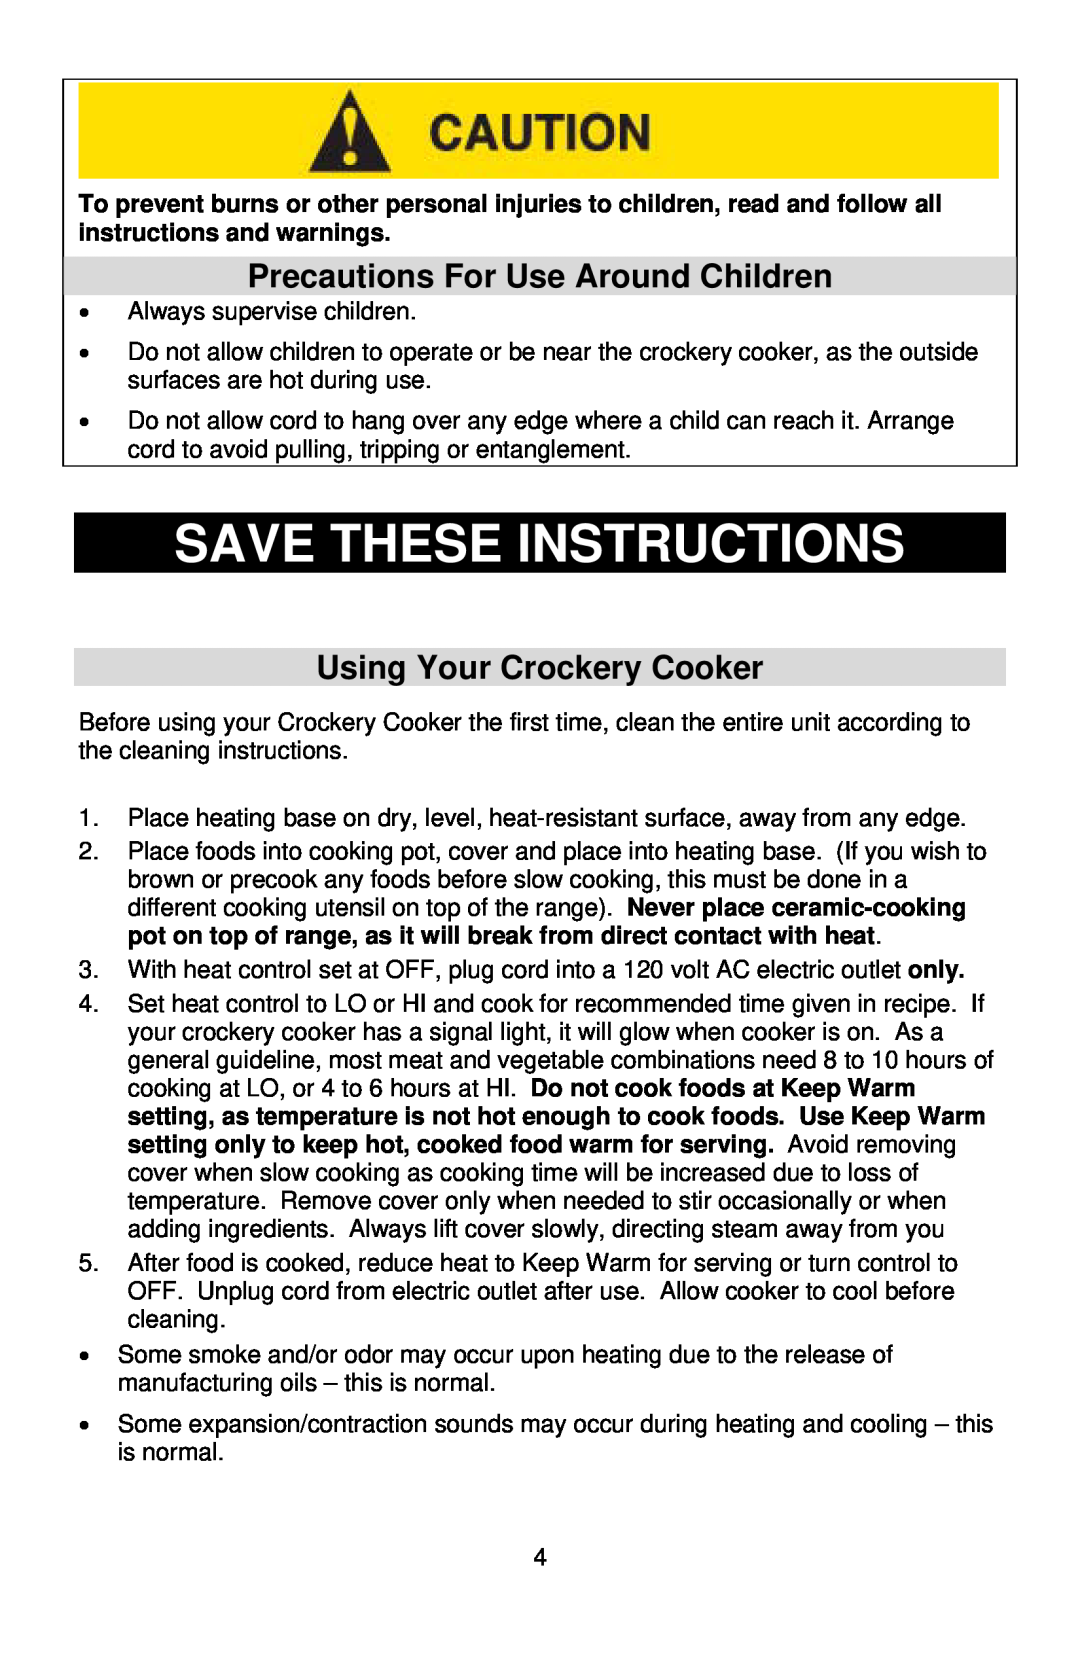 West Bend 5 6 Quart CrockeryTM Cooker instruction manual Save These Instructions, Precautions For Use Around Children 